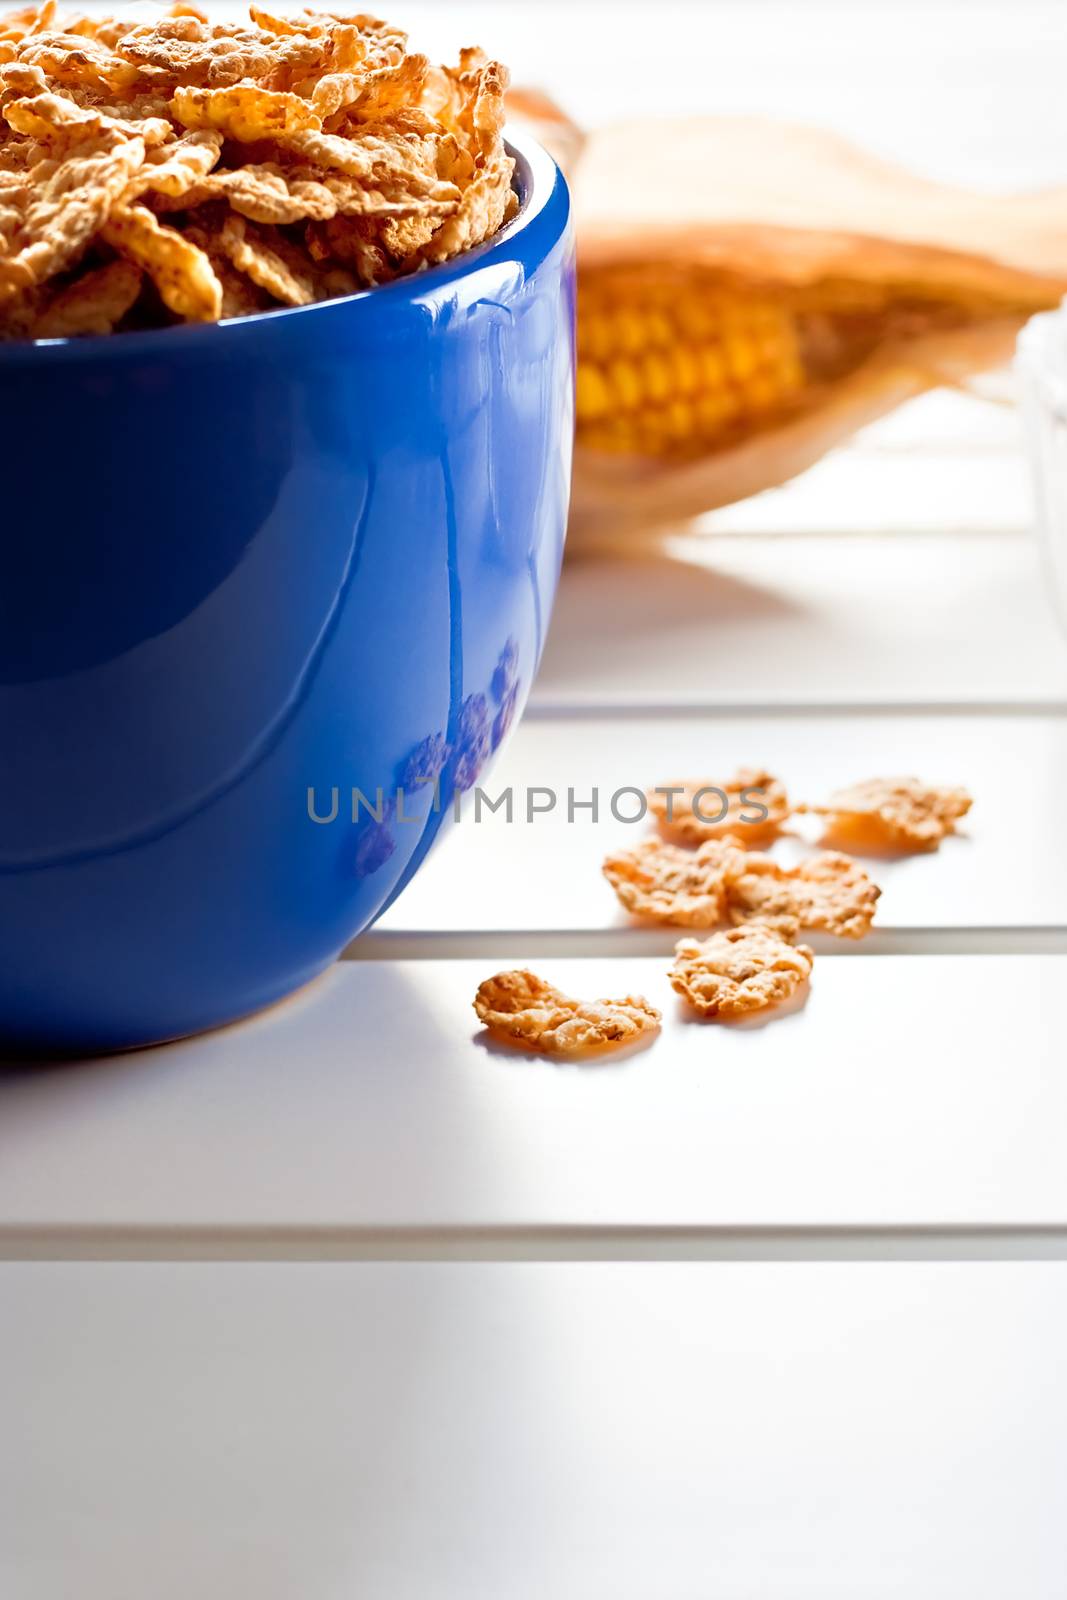 Cornflakes in a blue bowl on white wooden table with a cob